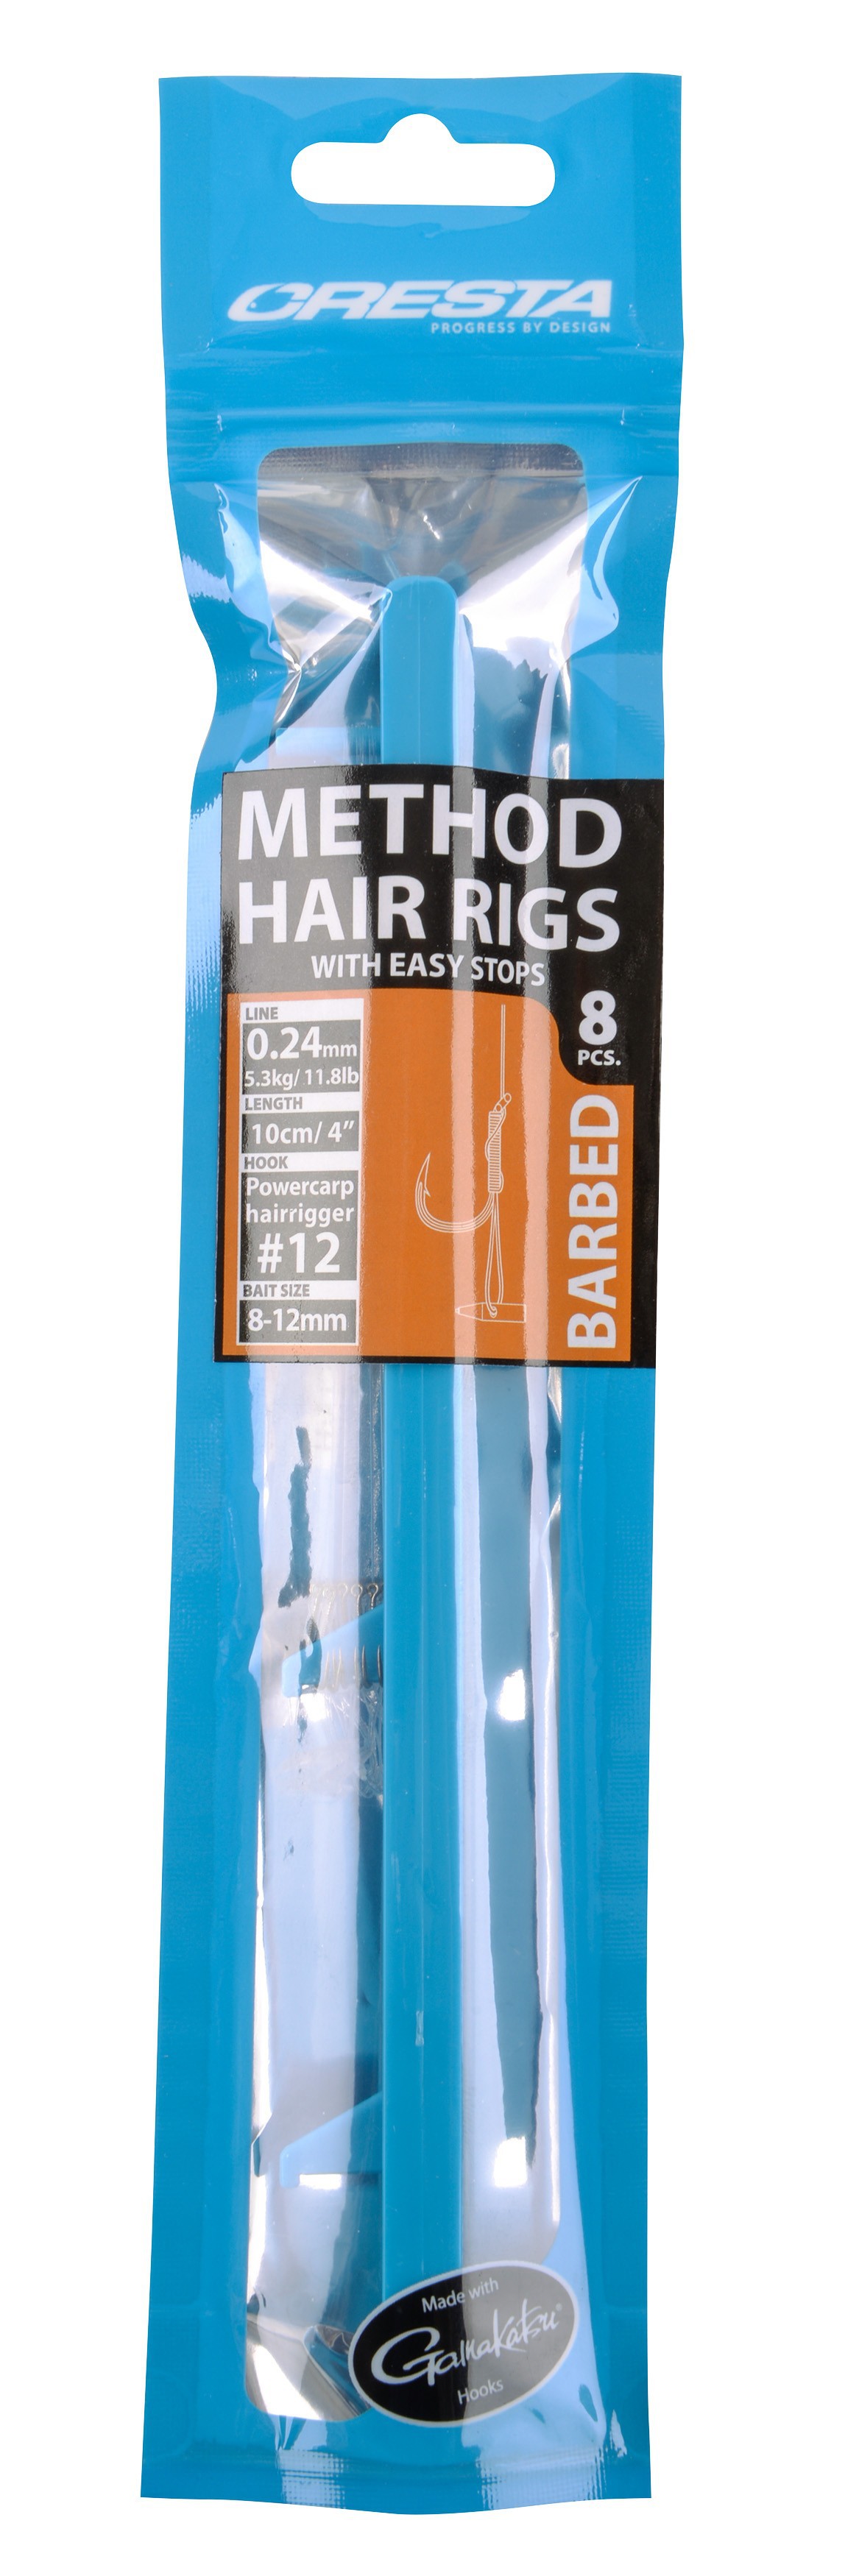 Spro - Cresta Method Hair Rigs With Easy Stops Barbed 4" – 10 cm Size 16